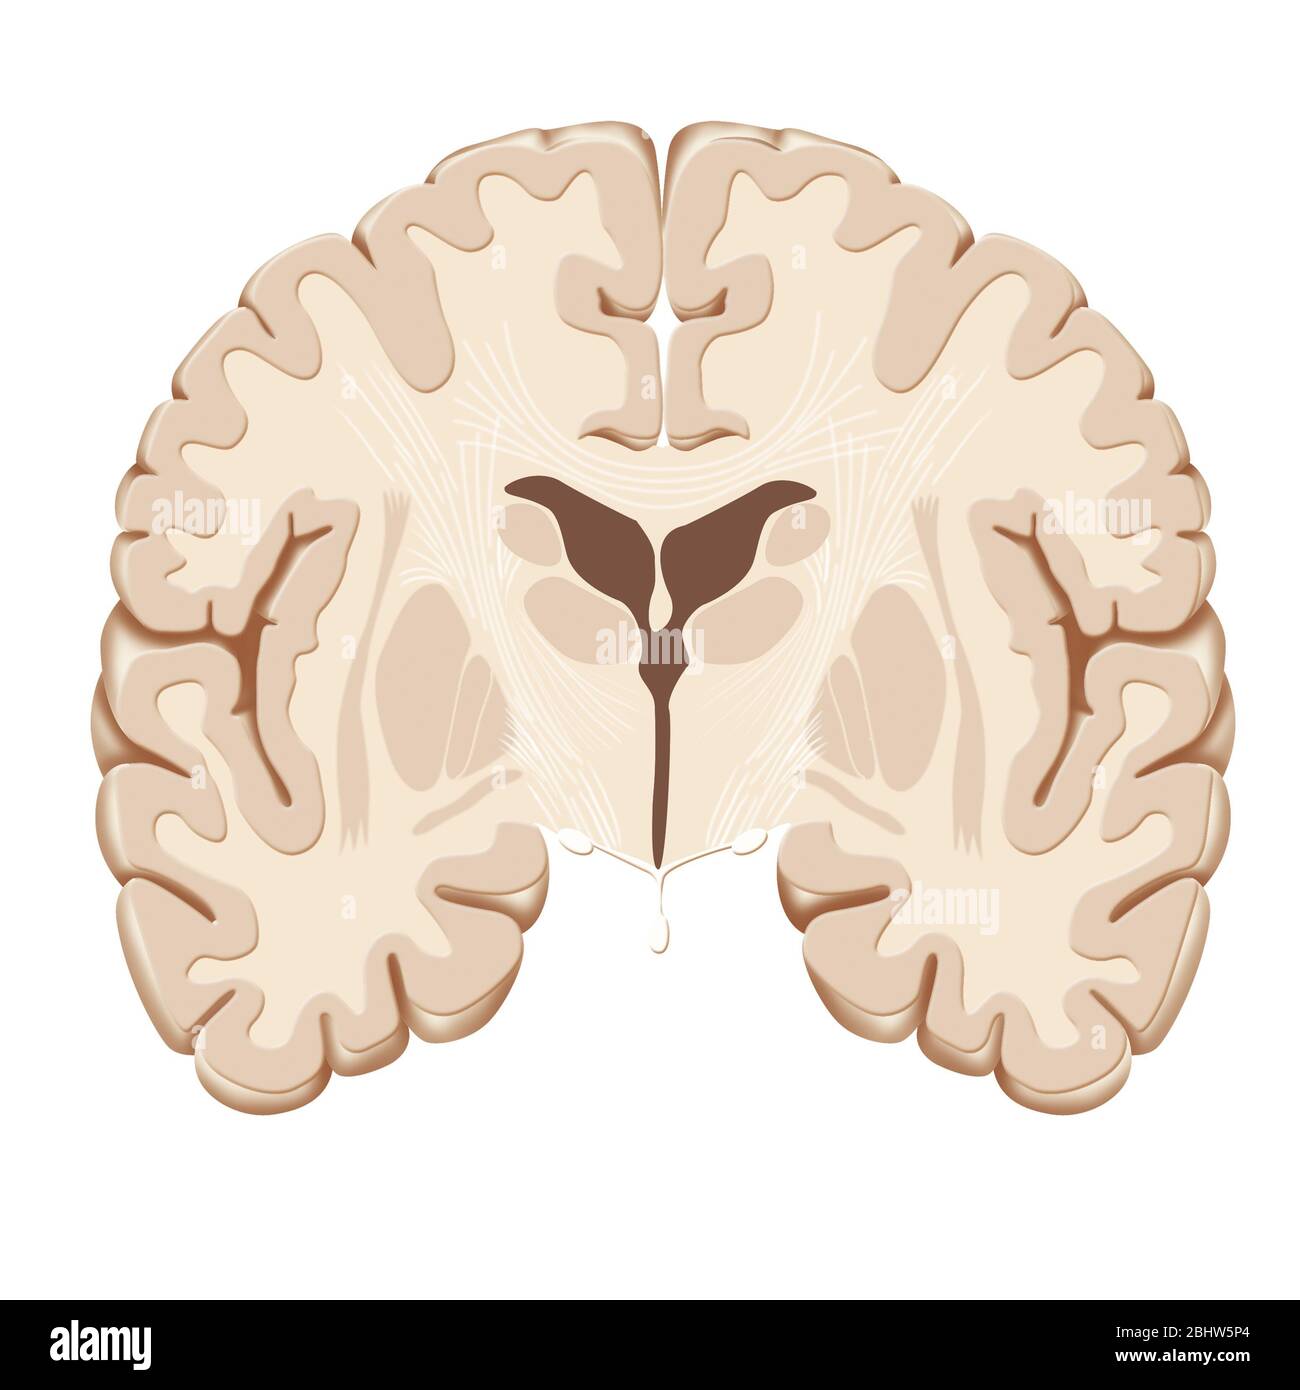 Anatomy of the brain in frontal section, distinguishing the hypophysis, the optic tracts, the thalamus and the caudate nuclei, the lateral ventricles. Stock Photo